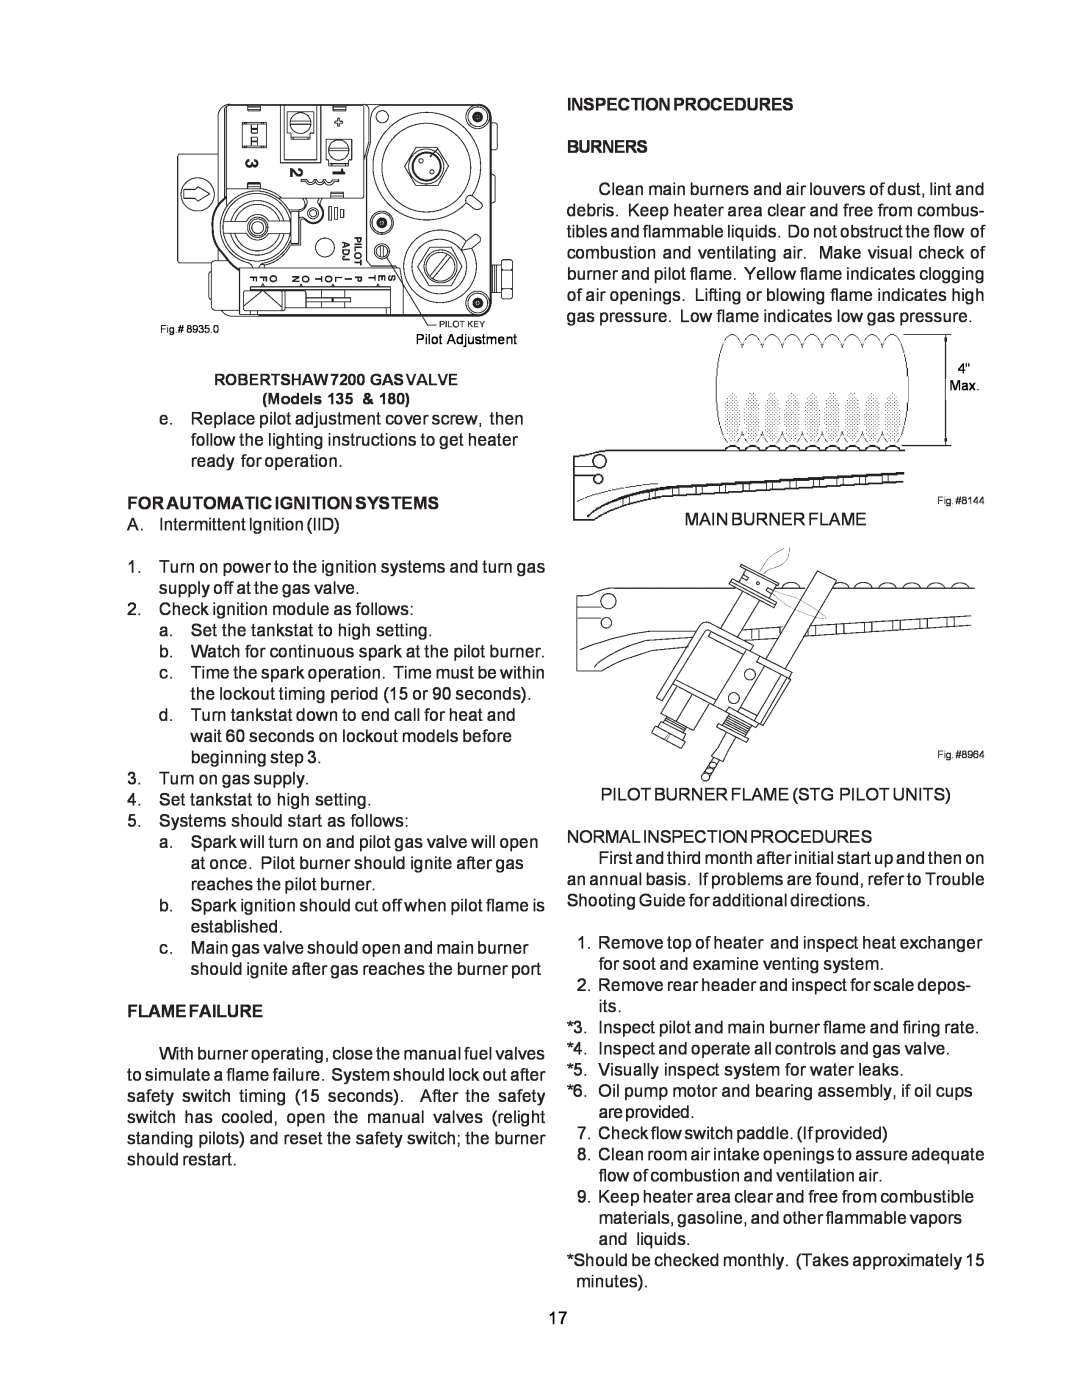 Raypak 090A, 195A, 135A manual For Automatic Ignition Systems, Flamefailure, Inspectionprocedures Burners 